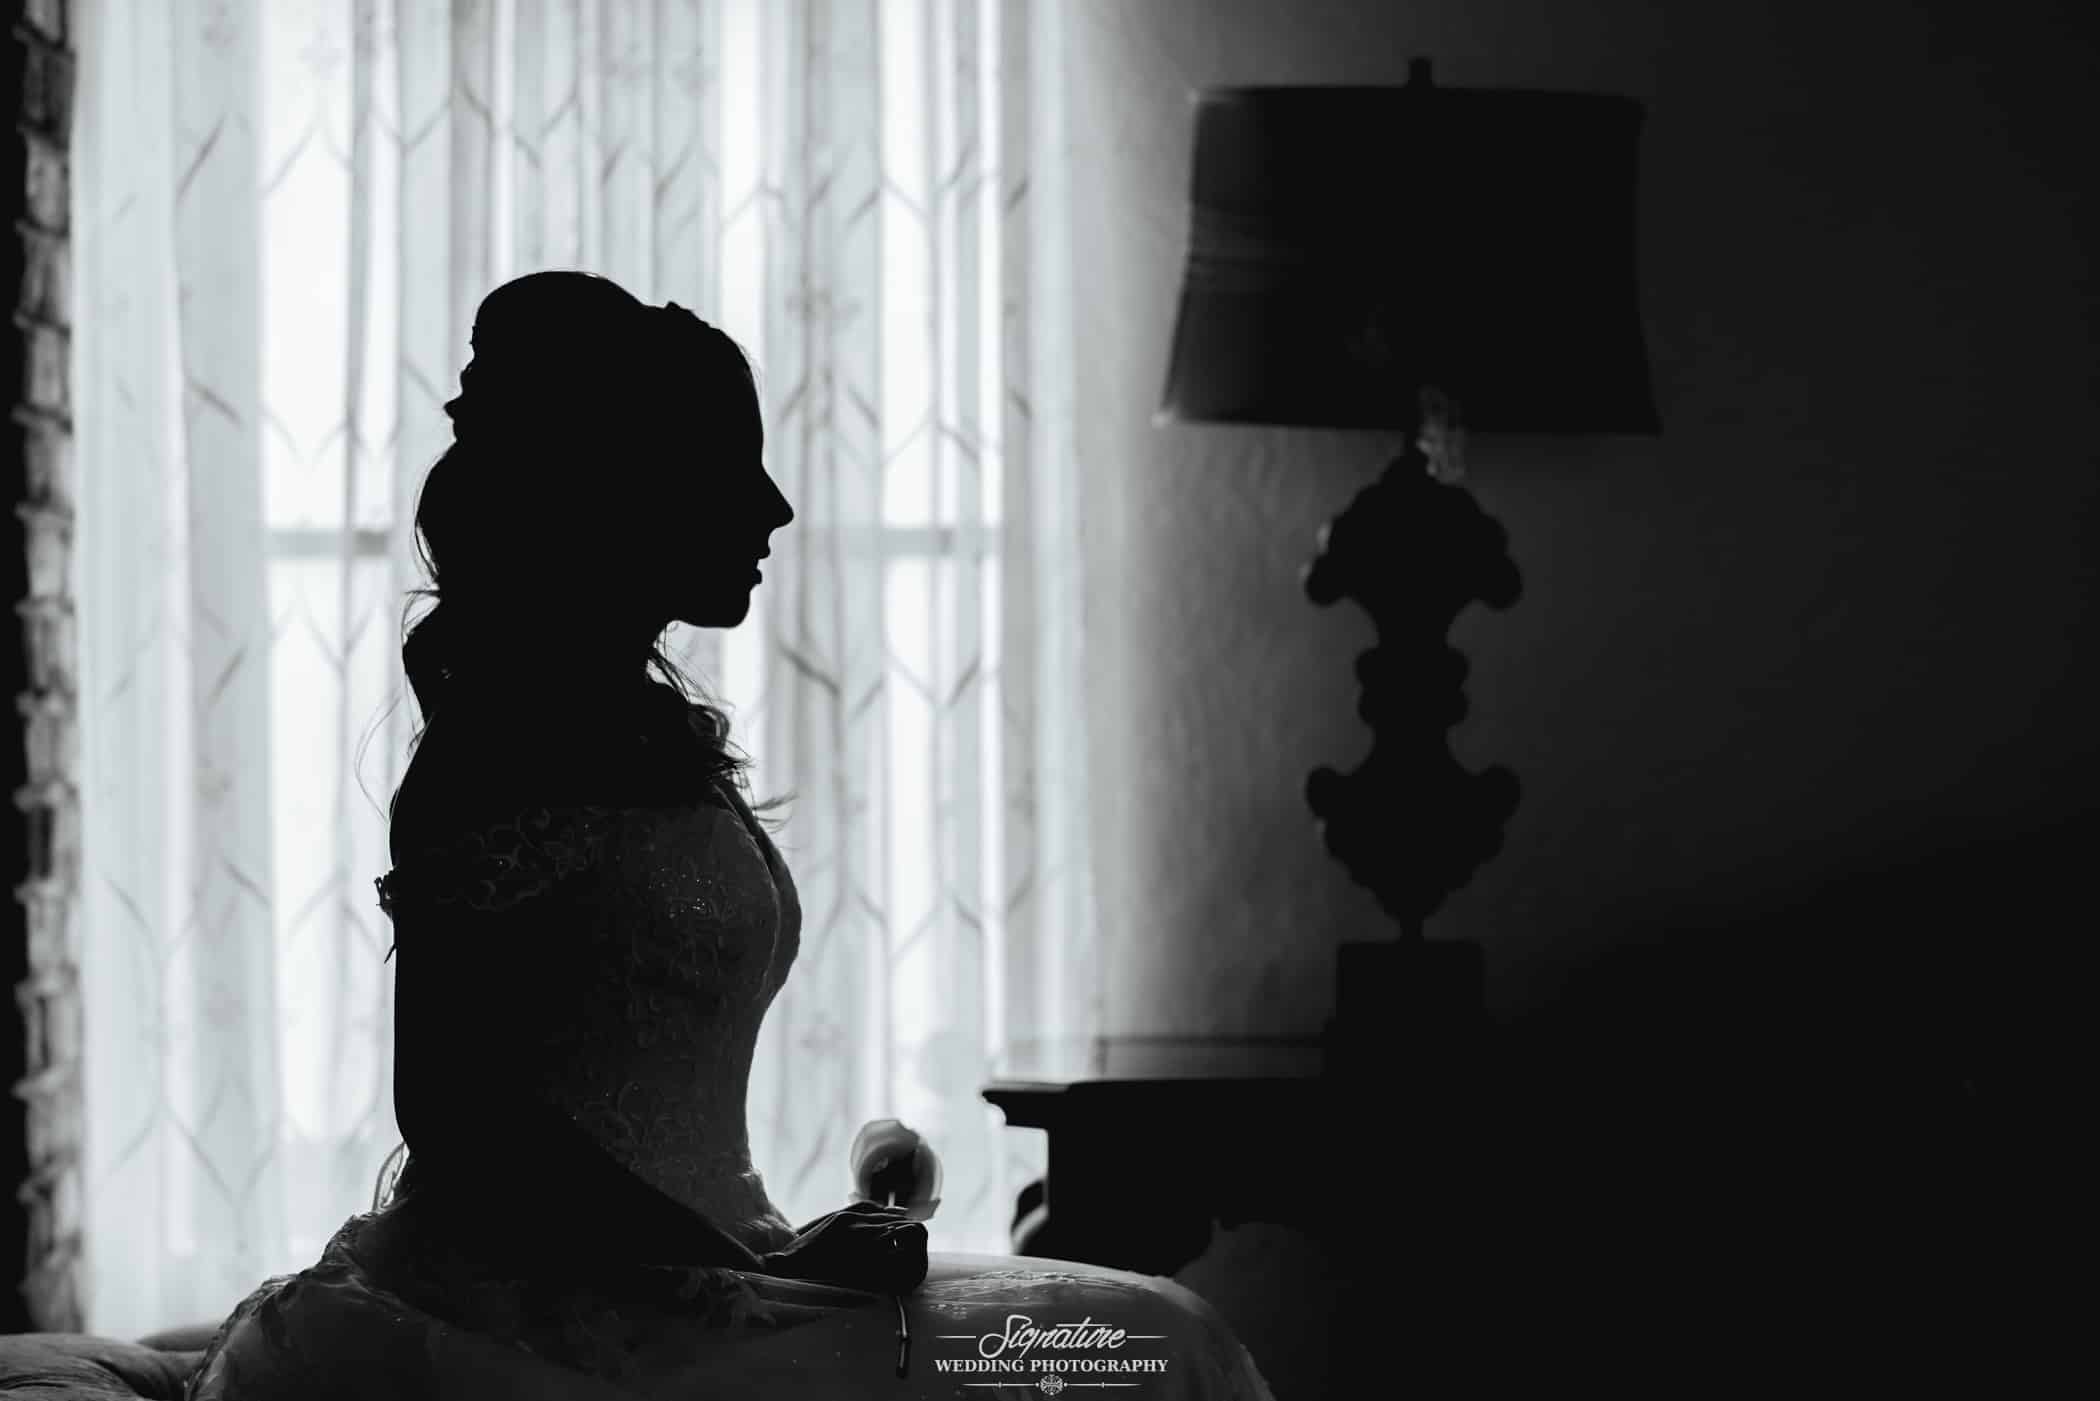 Bride sitting on bed silhouette